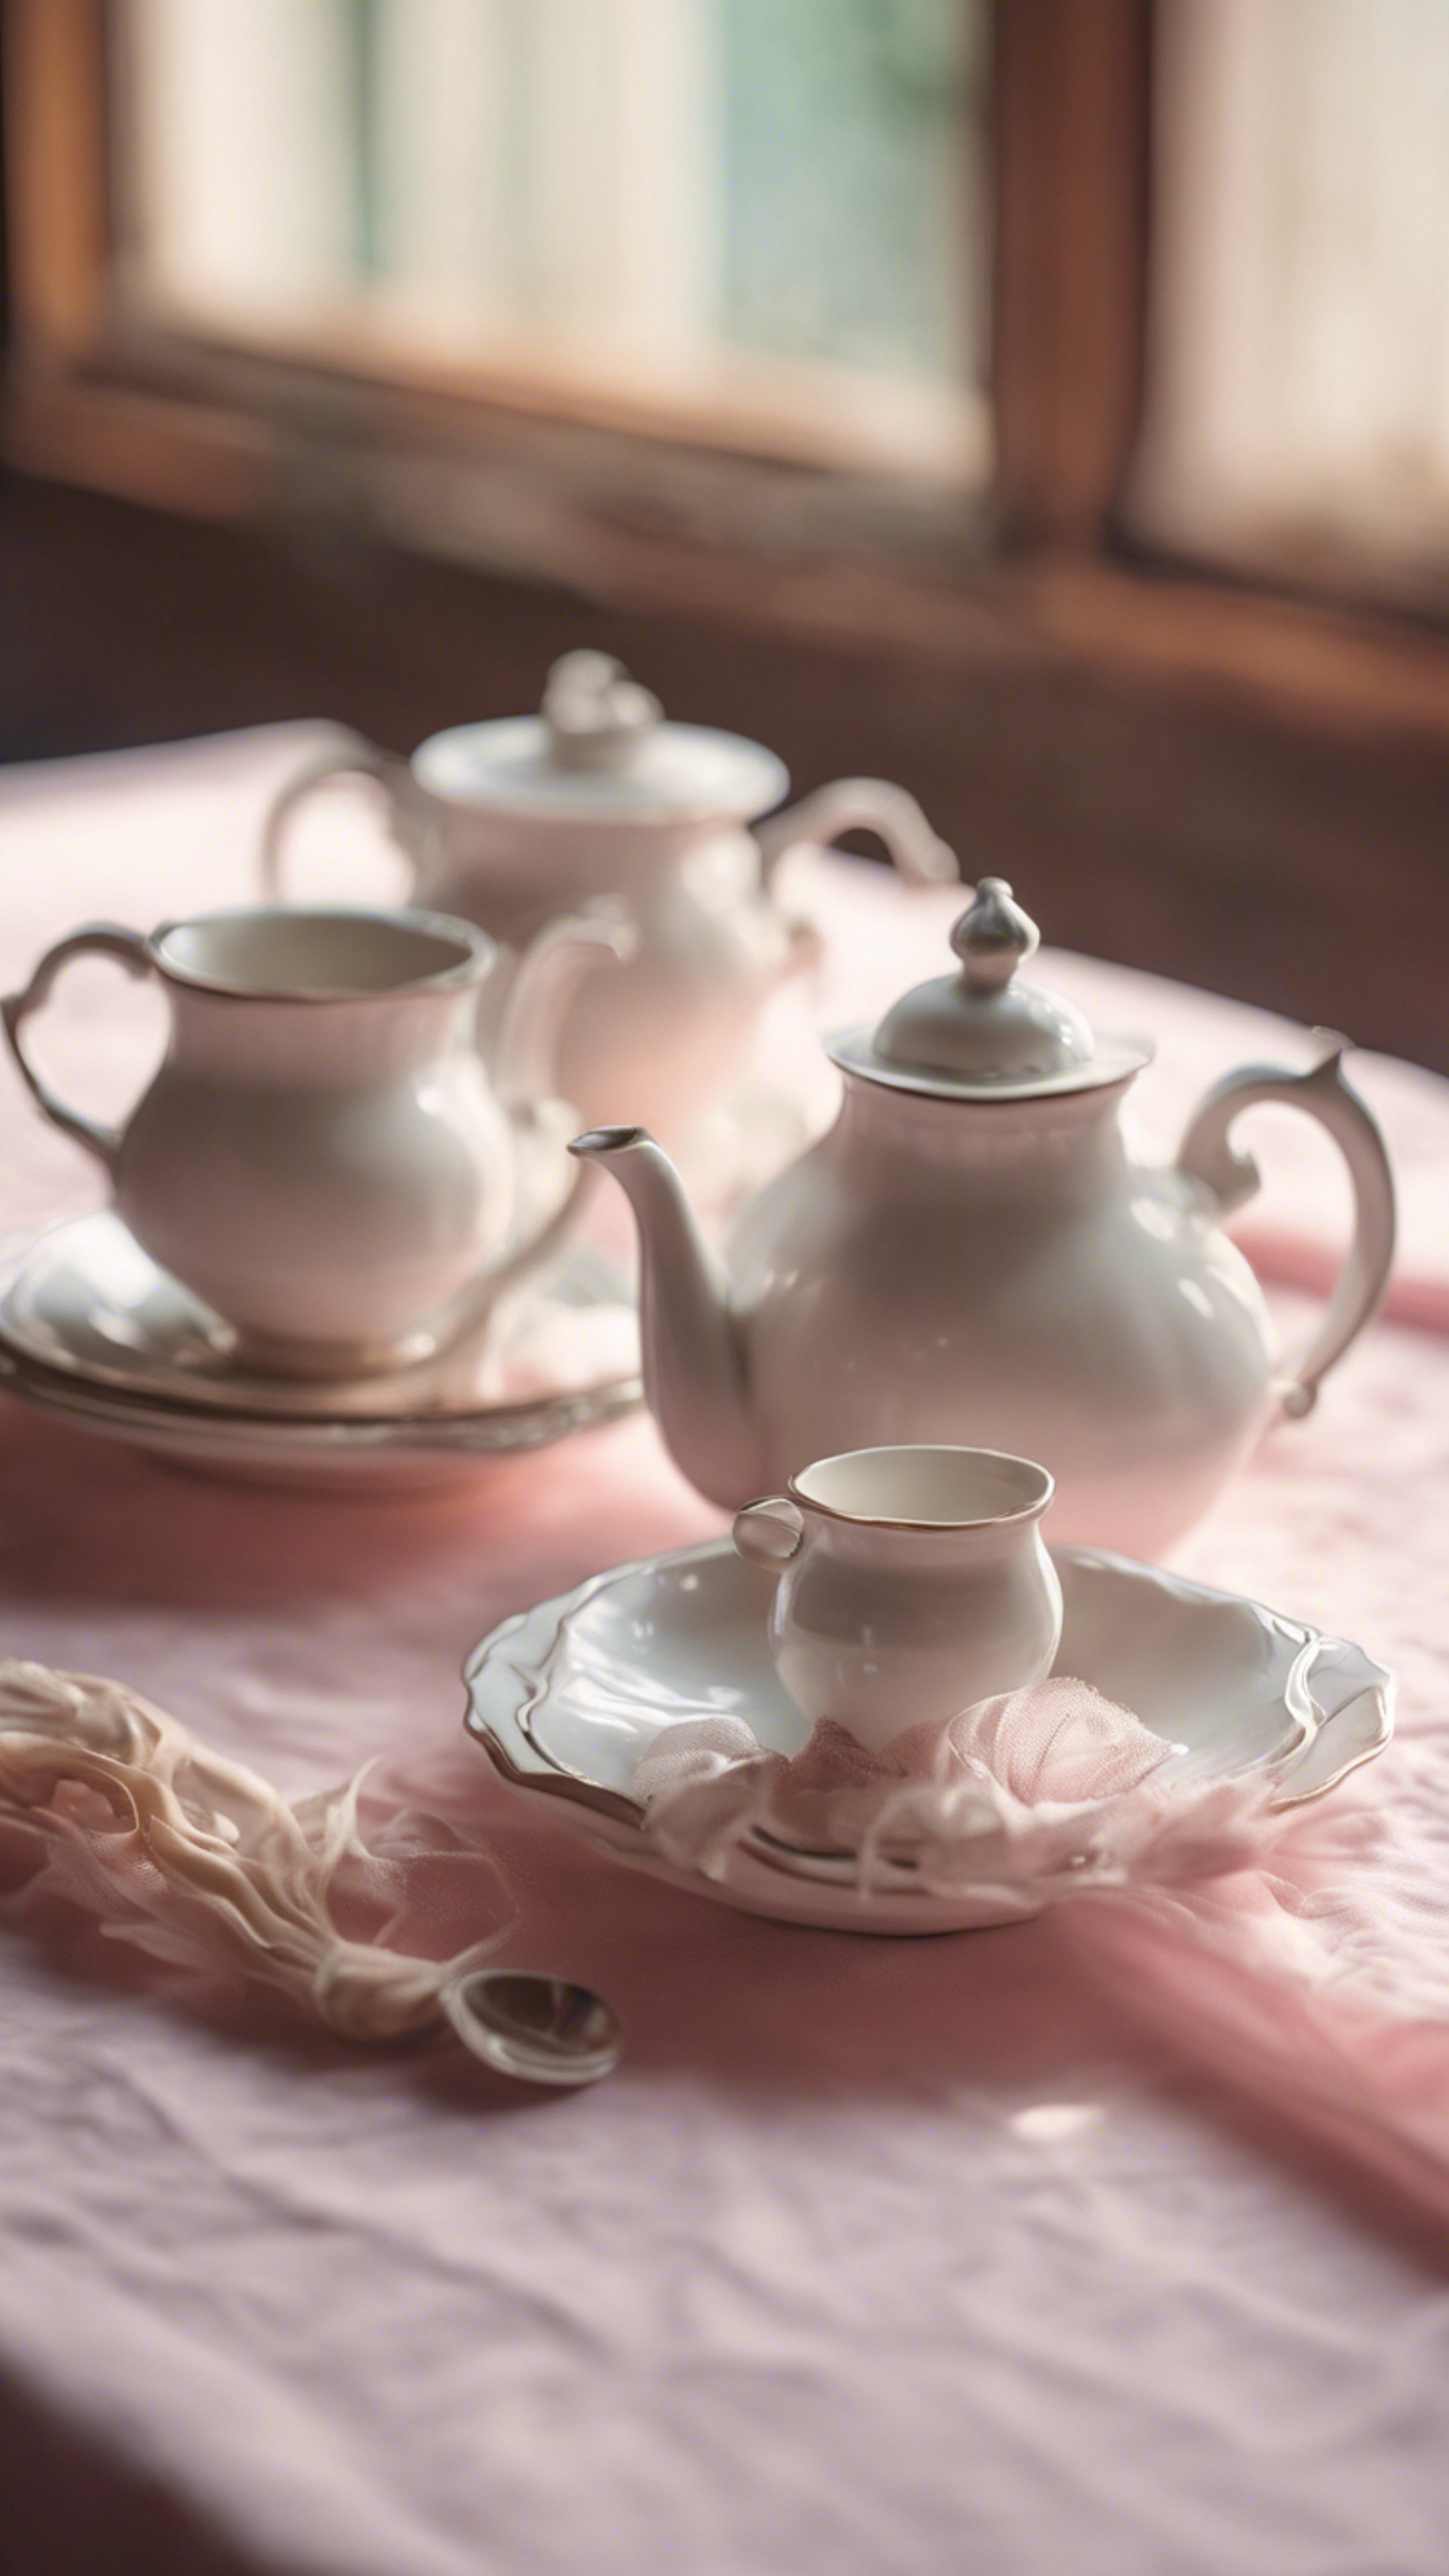 A vintage white tea set, arranged on a fluffy pastel pink tablecloth in a charming, old-world kitchen. Kertas dinding[519305883ddb44018966]